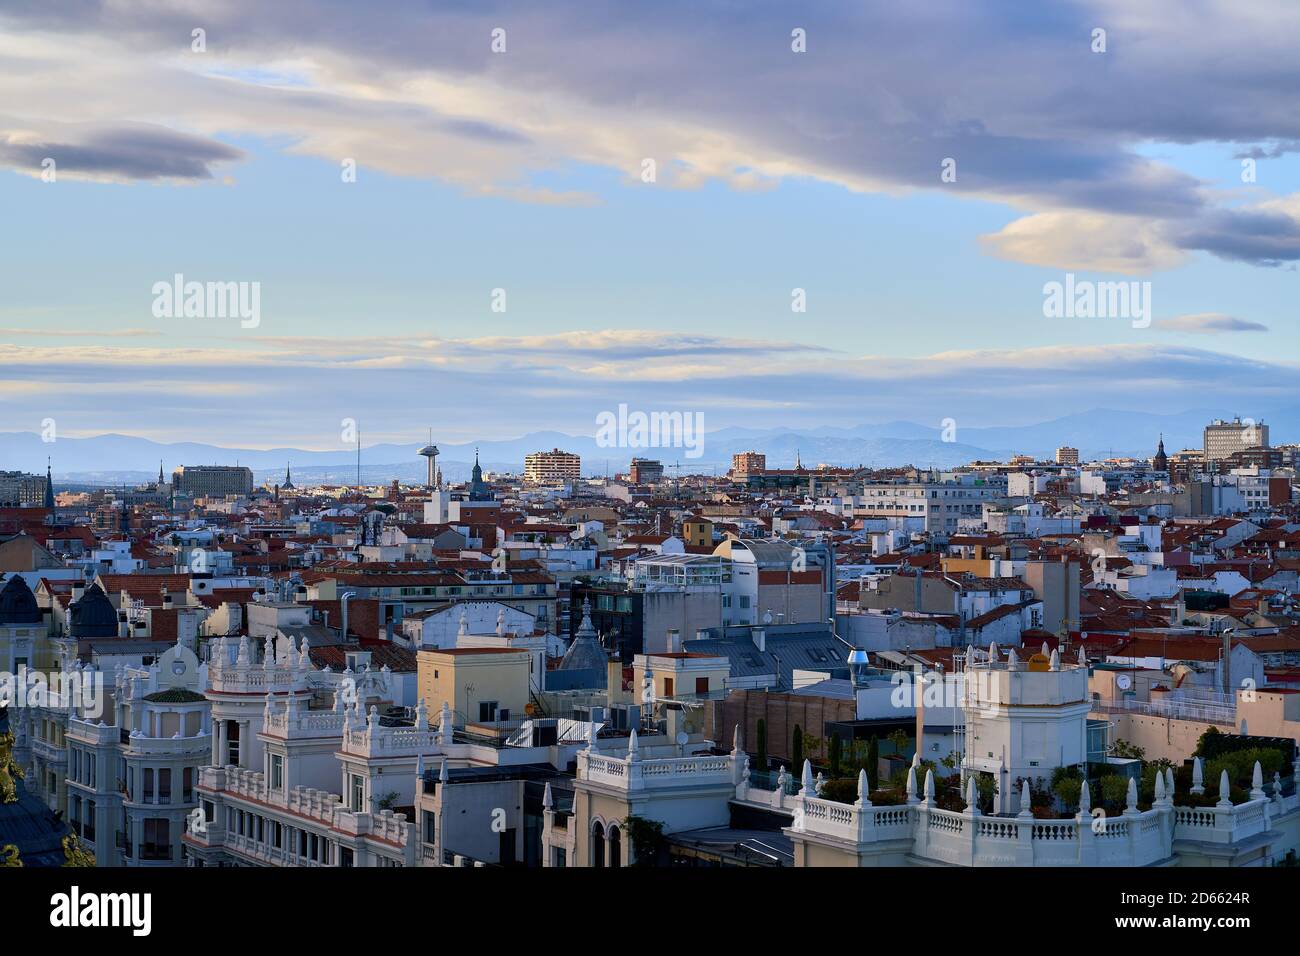 View from the Circulo de bellas artes across the rooftops towards the mountains, Madrid, Spain, September 2020 Stock Photo